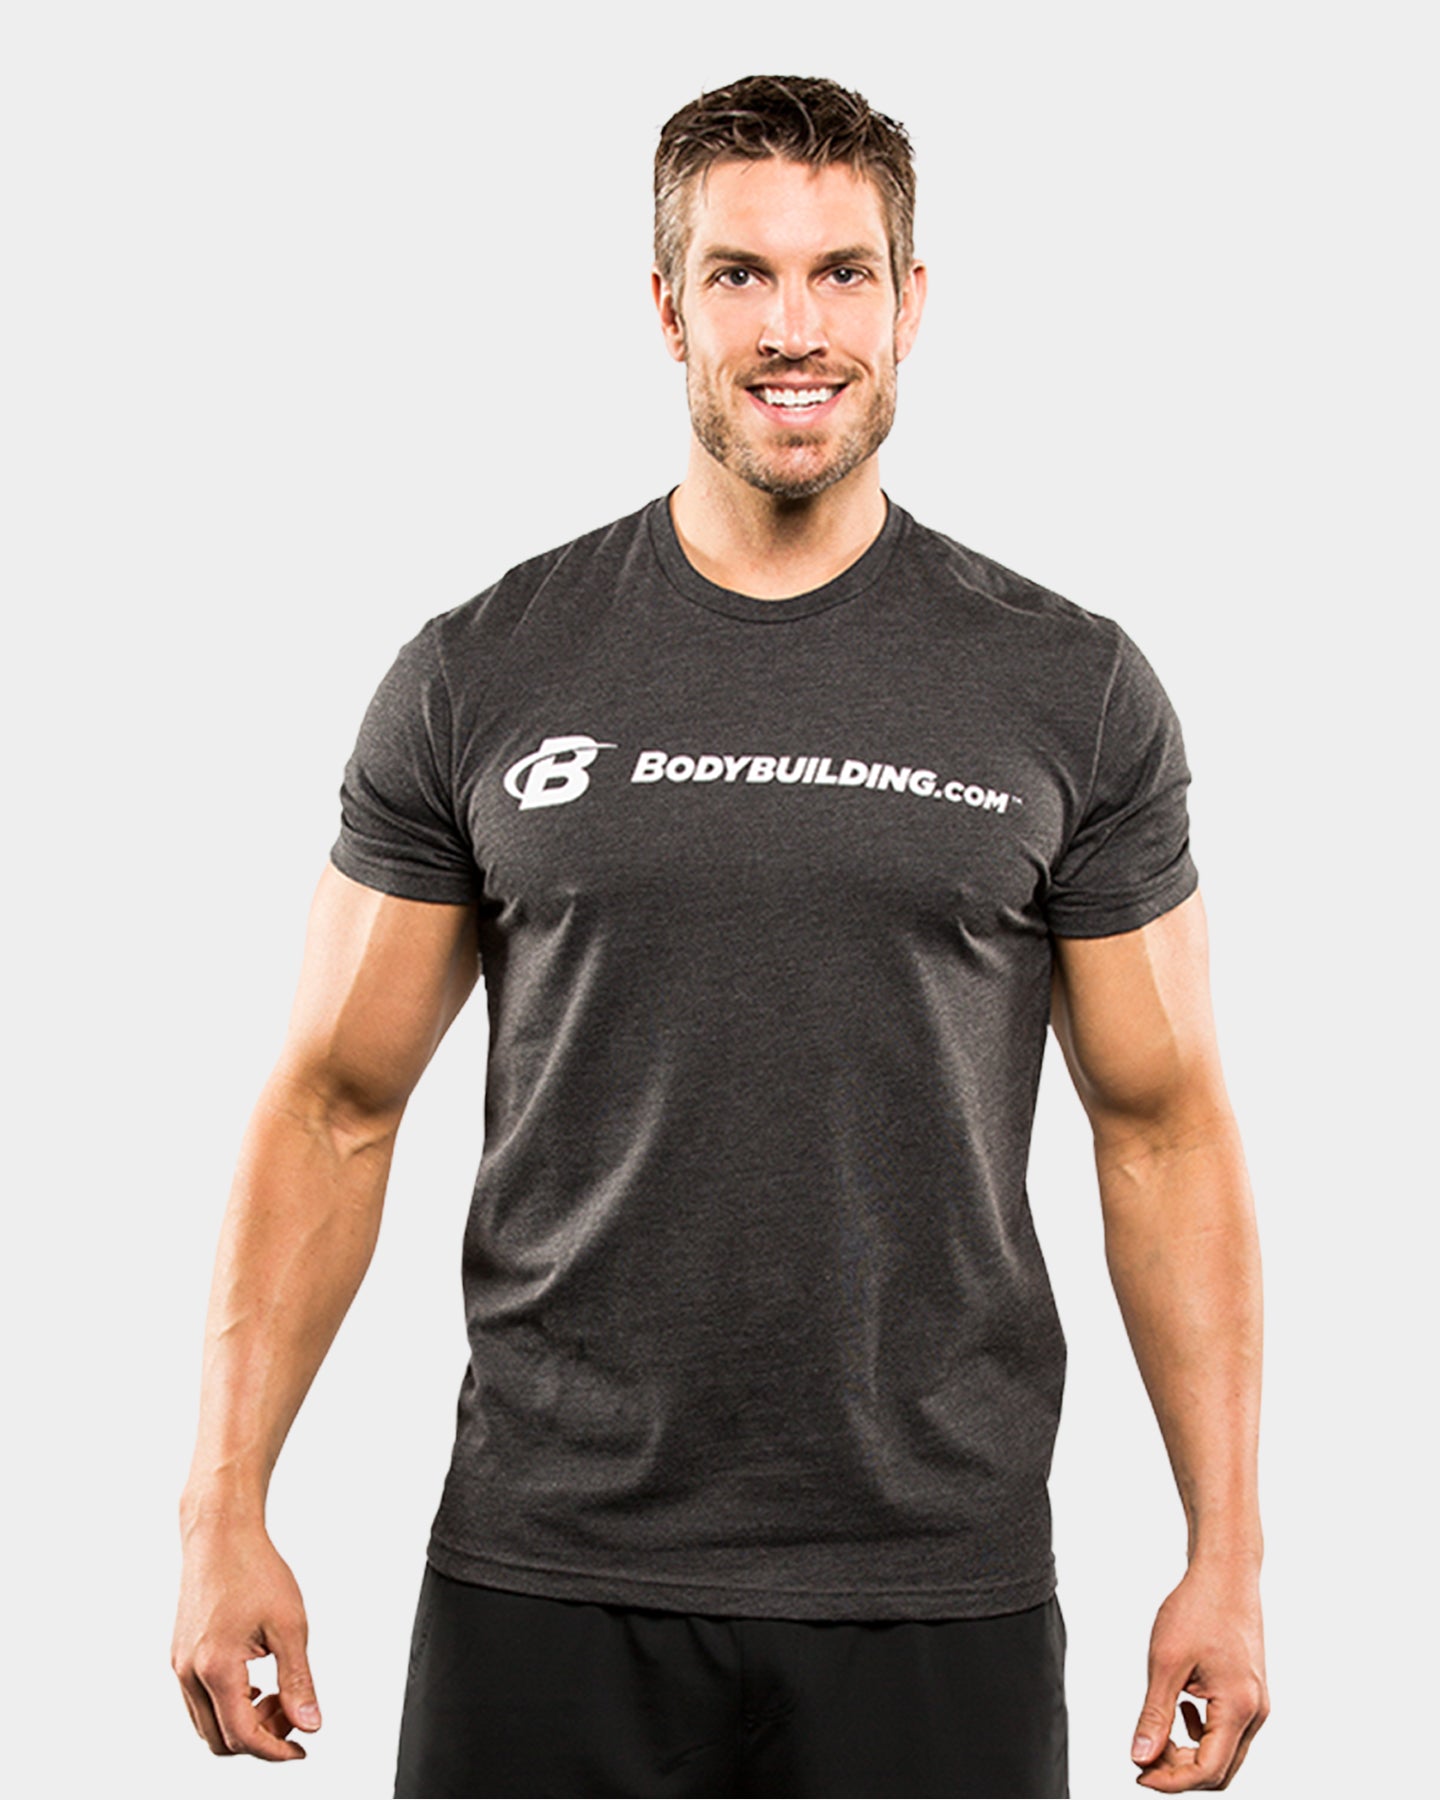 sejr barrikade frivillig Core Simple Classic Tee by Bodybuilding.com Clothing at Bodybuilding.com -  Best Prices on Core Simple Classic Tee!